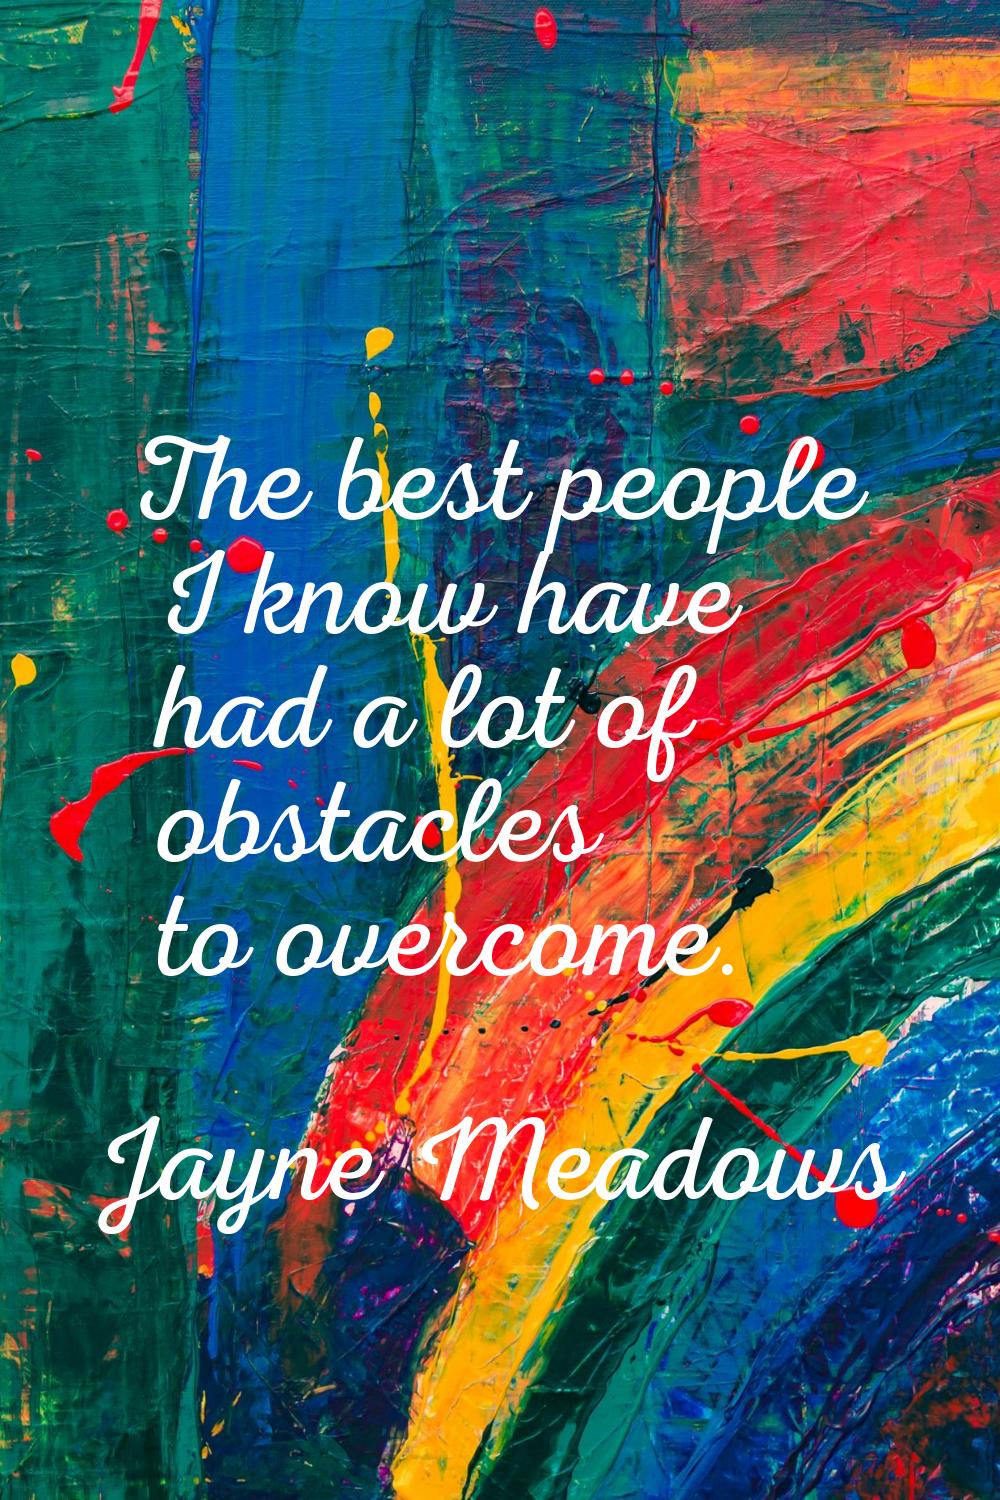 The best people I know have had a lot of obstacles to overcome.